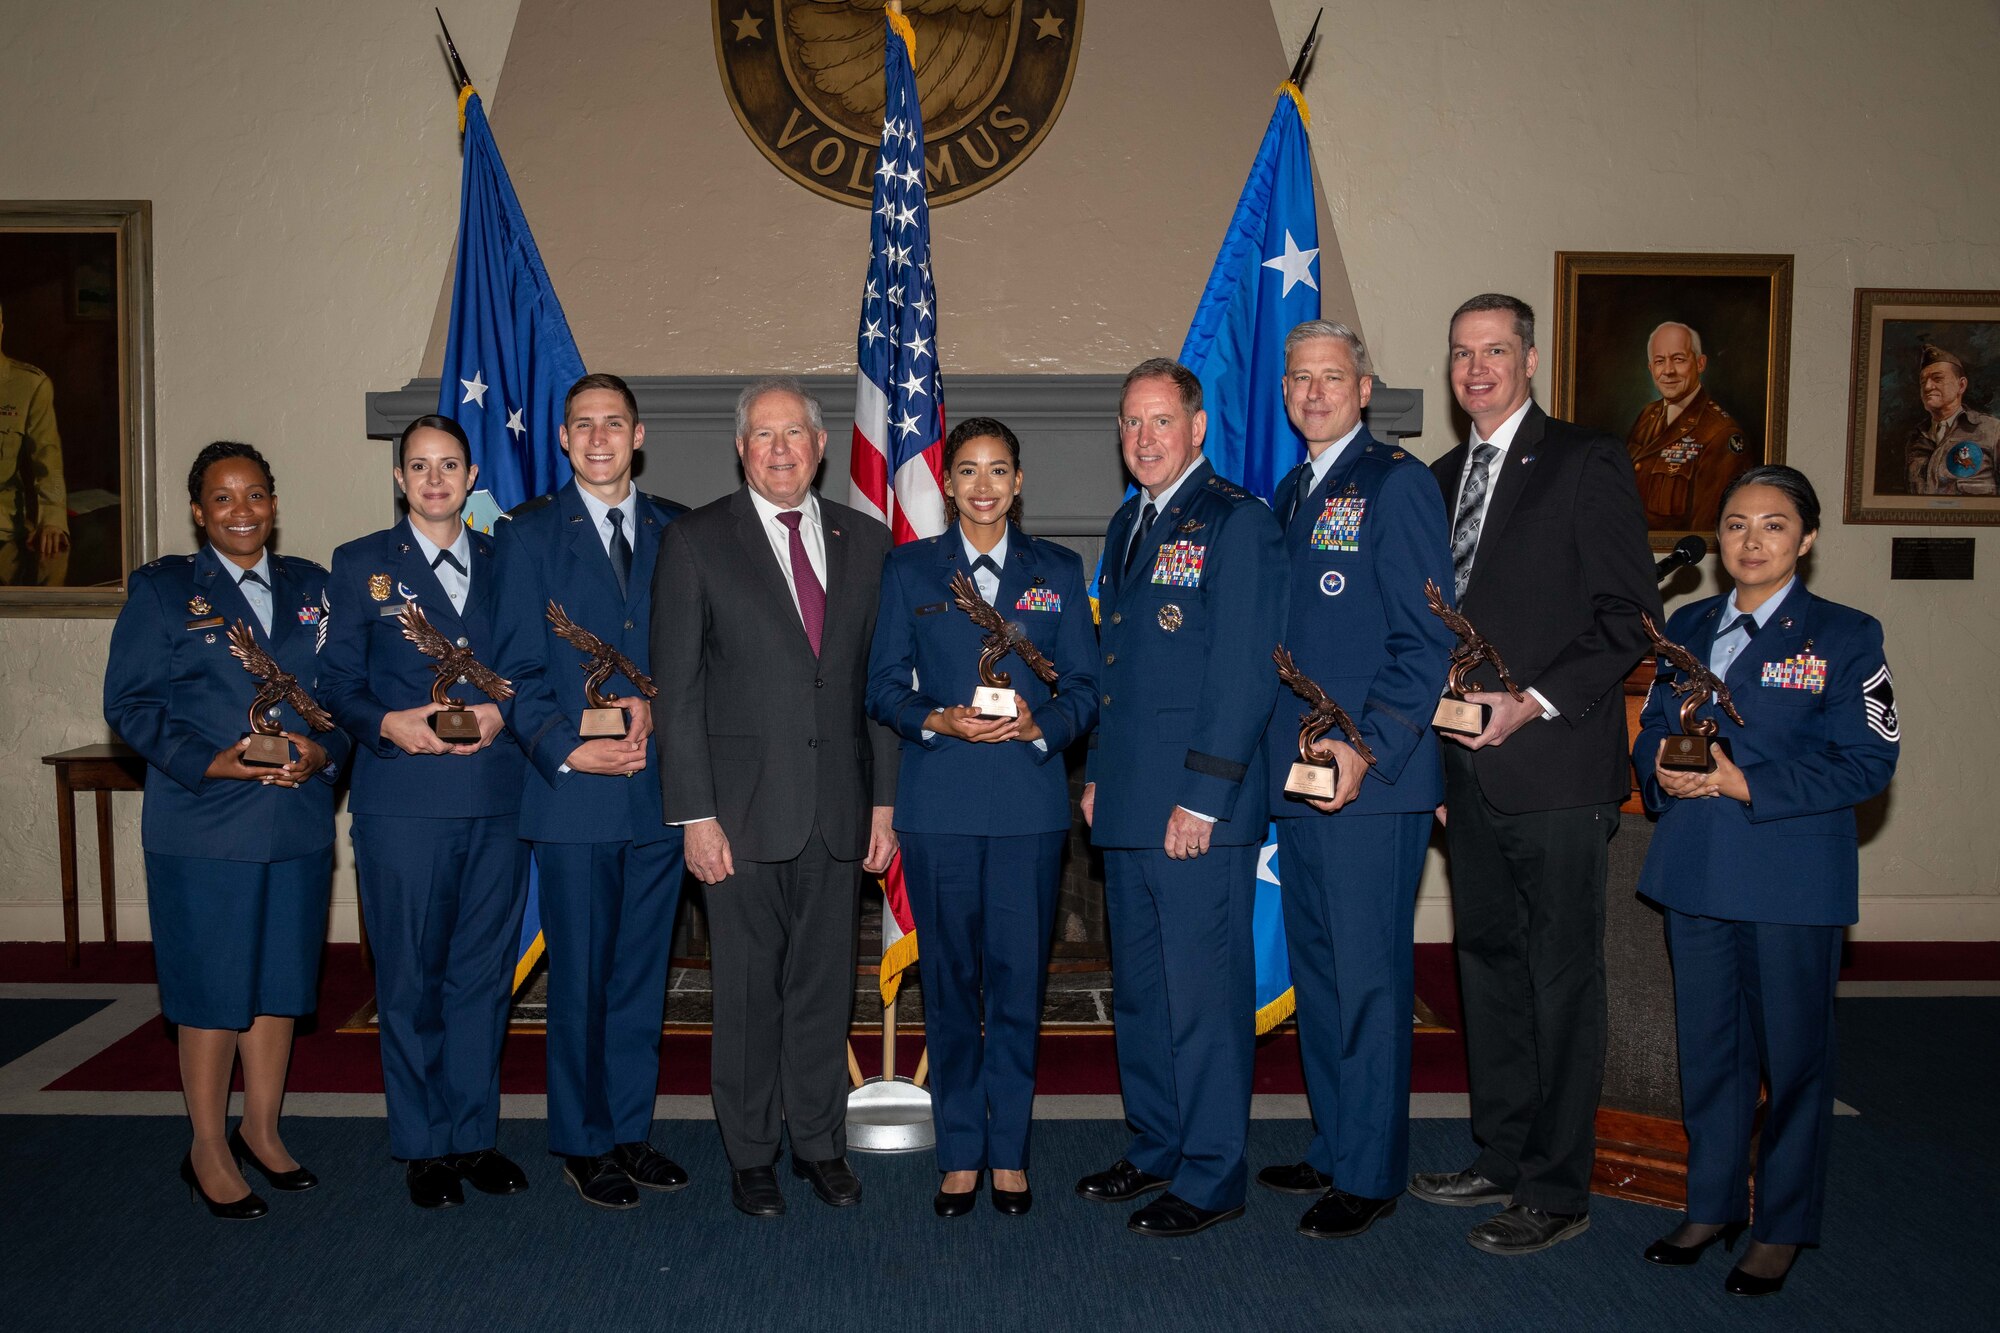 Secretary of the Air Force Frank Kendall presented leadership awards to several Air University staff, faculty, current and former students and cadets during a presentation ceremony April 10, 2022, Maxwell Air Force Base, Alabama. The Secretary of the Air Force Leadership Award Airmen who exhibit exemplary leadership, character and ethical behavior. Award recipients pictured with Kendall (fourth from left) and Lt. Gen. James Hecker (sixth from left), Air University commander and president, are Lt. Col. Stephanie Wilson, Senior Master Sgt. Krystle Hill, Air Force ROTC Cadet Andrew Bainbridge, Officer Training School Cadet Taylor McOnie, Maj. Brian Boyle, Dr. Andrew Bowens and Senior Master Sgt. Anisa Haney. Recipient Capt. Joseph Halley was not available for the presentation ceremony. (U.S. Air Force photo by Melanie Rodgers Cox)